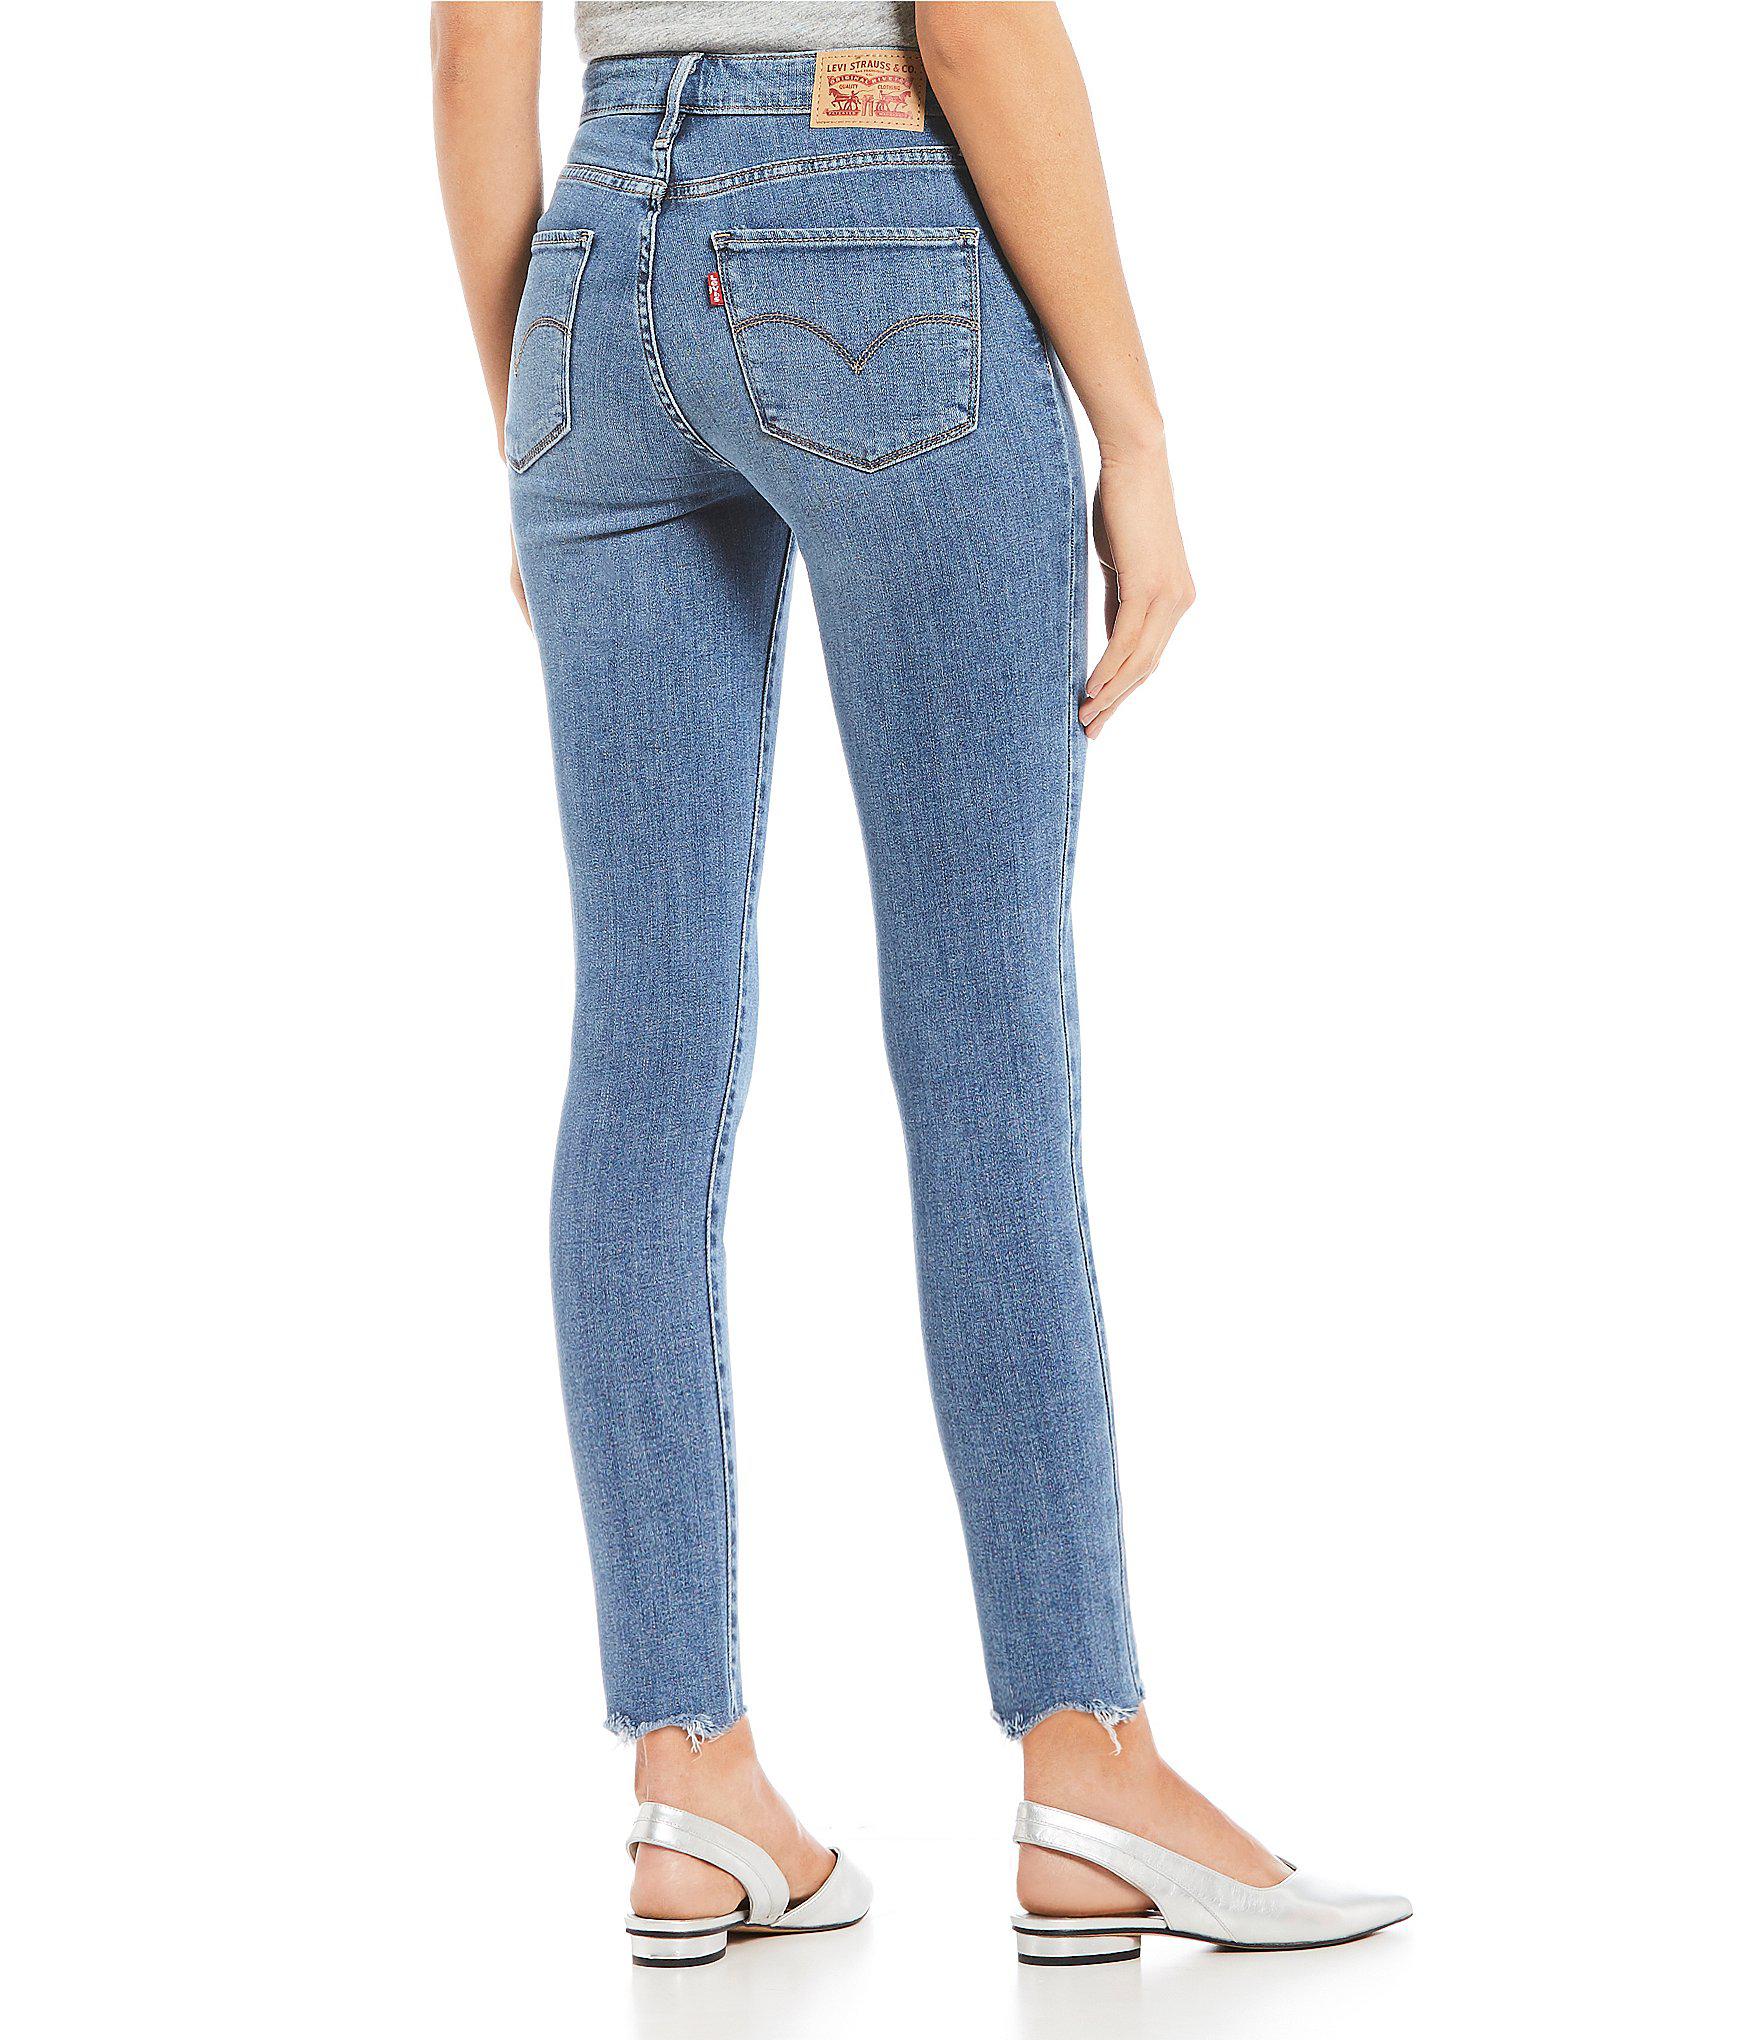 levi's 721 high rise skinny ankle jeans Cheaper Than Retail Price> Buy  Clothing, Accessories and lifestyle products for women & men -